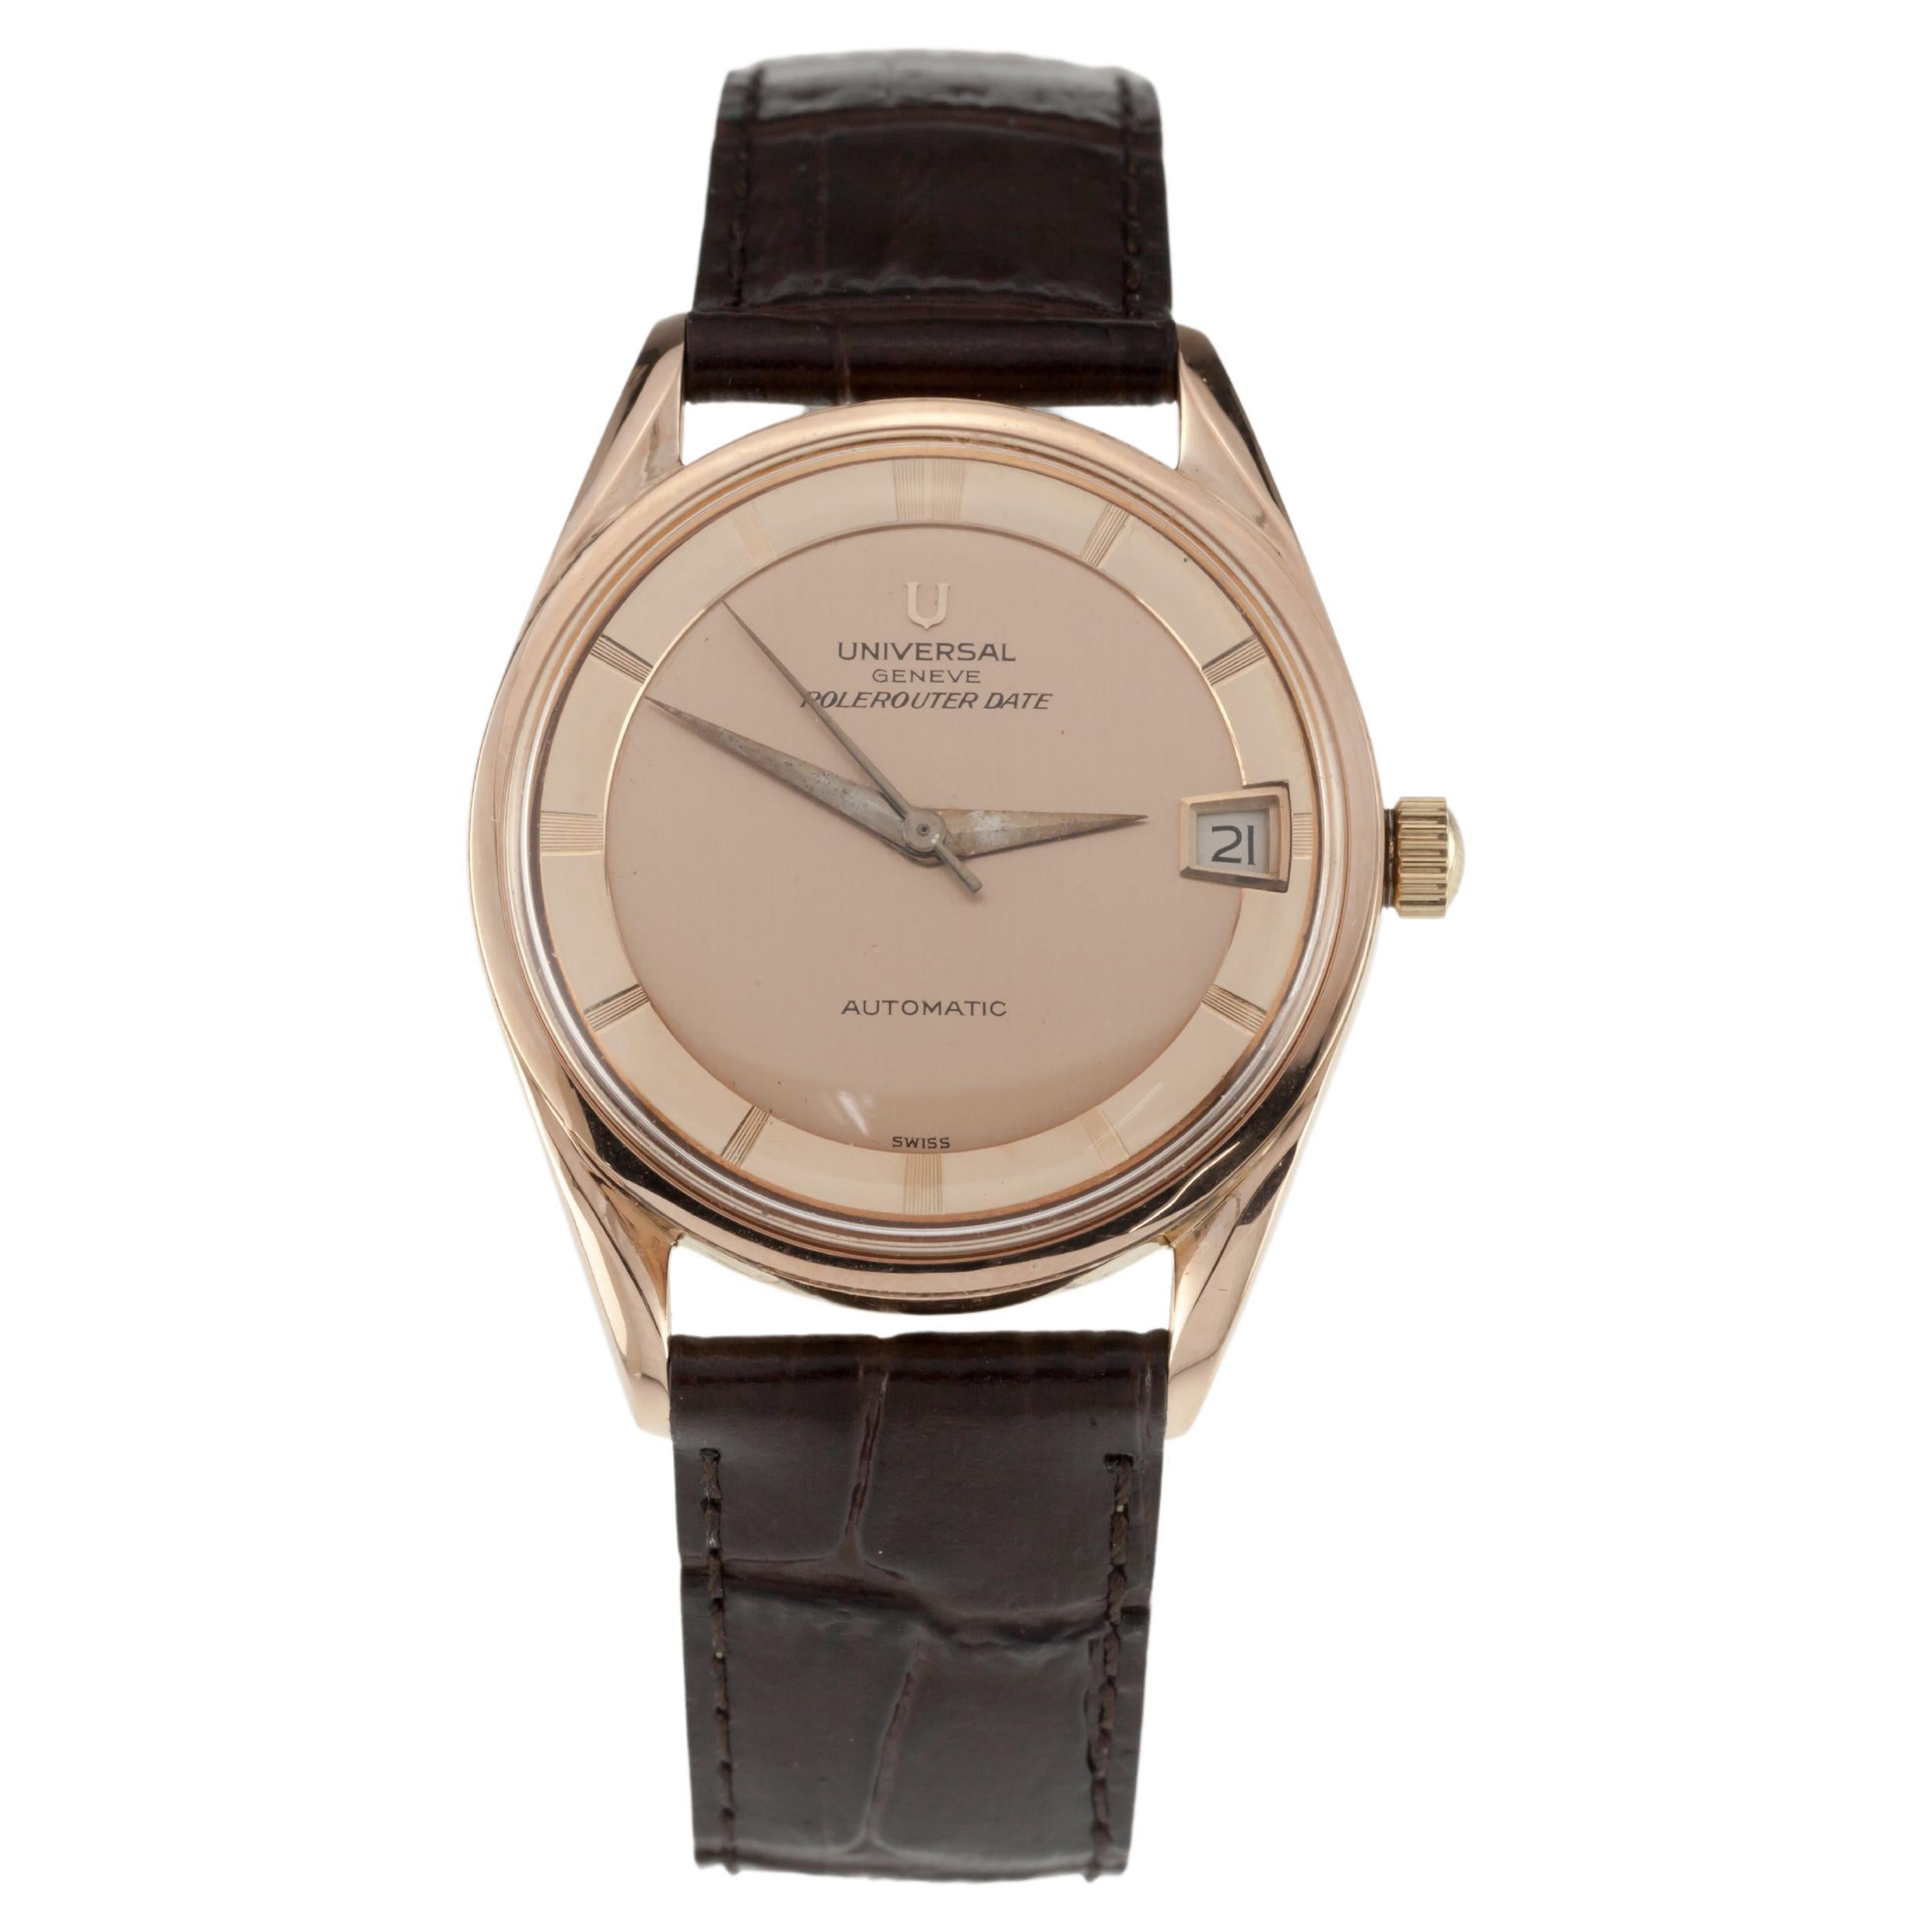 Universal Geneve 18k Rose Gold Automatic Polerouter Date w/ Leather Band 69 For Sale